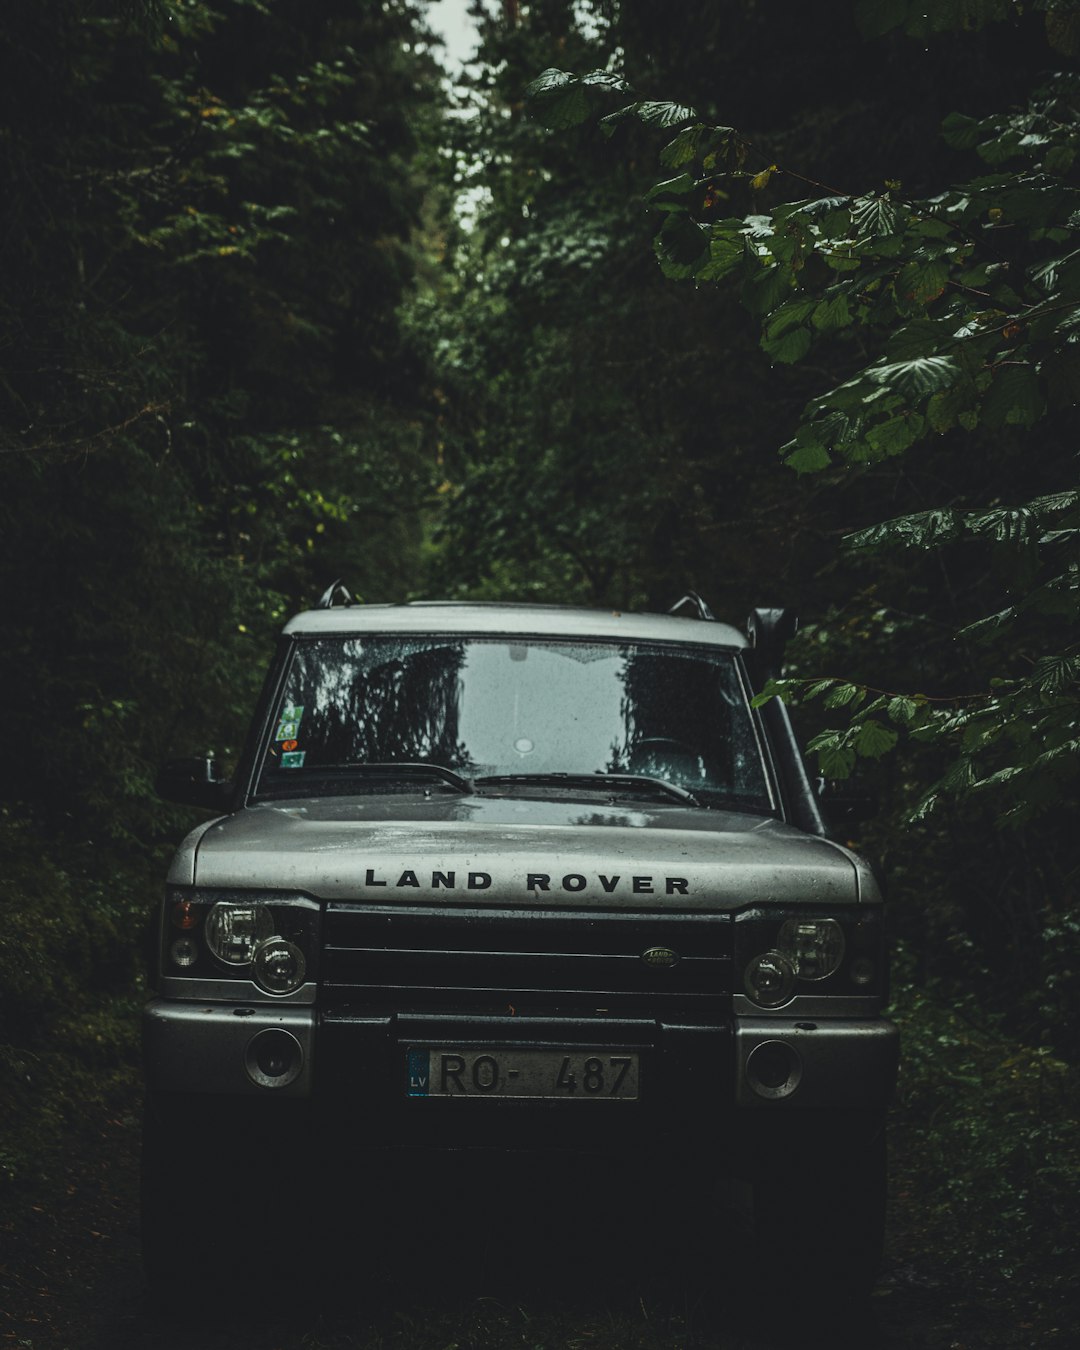 silver Land Rover SUV passing by a narrow road in the forest